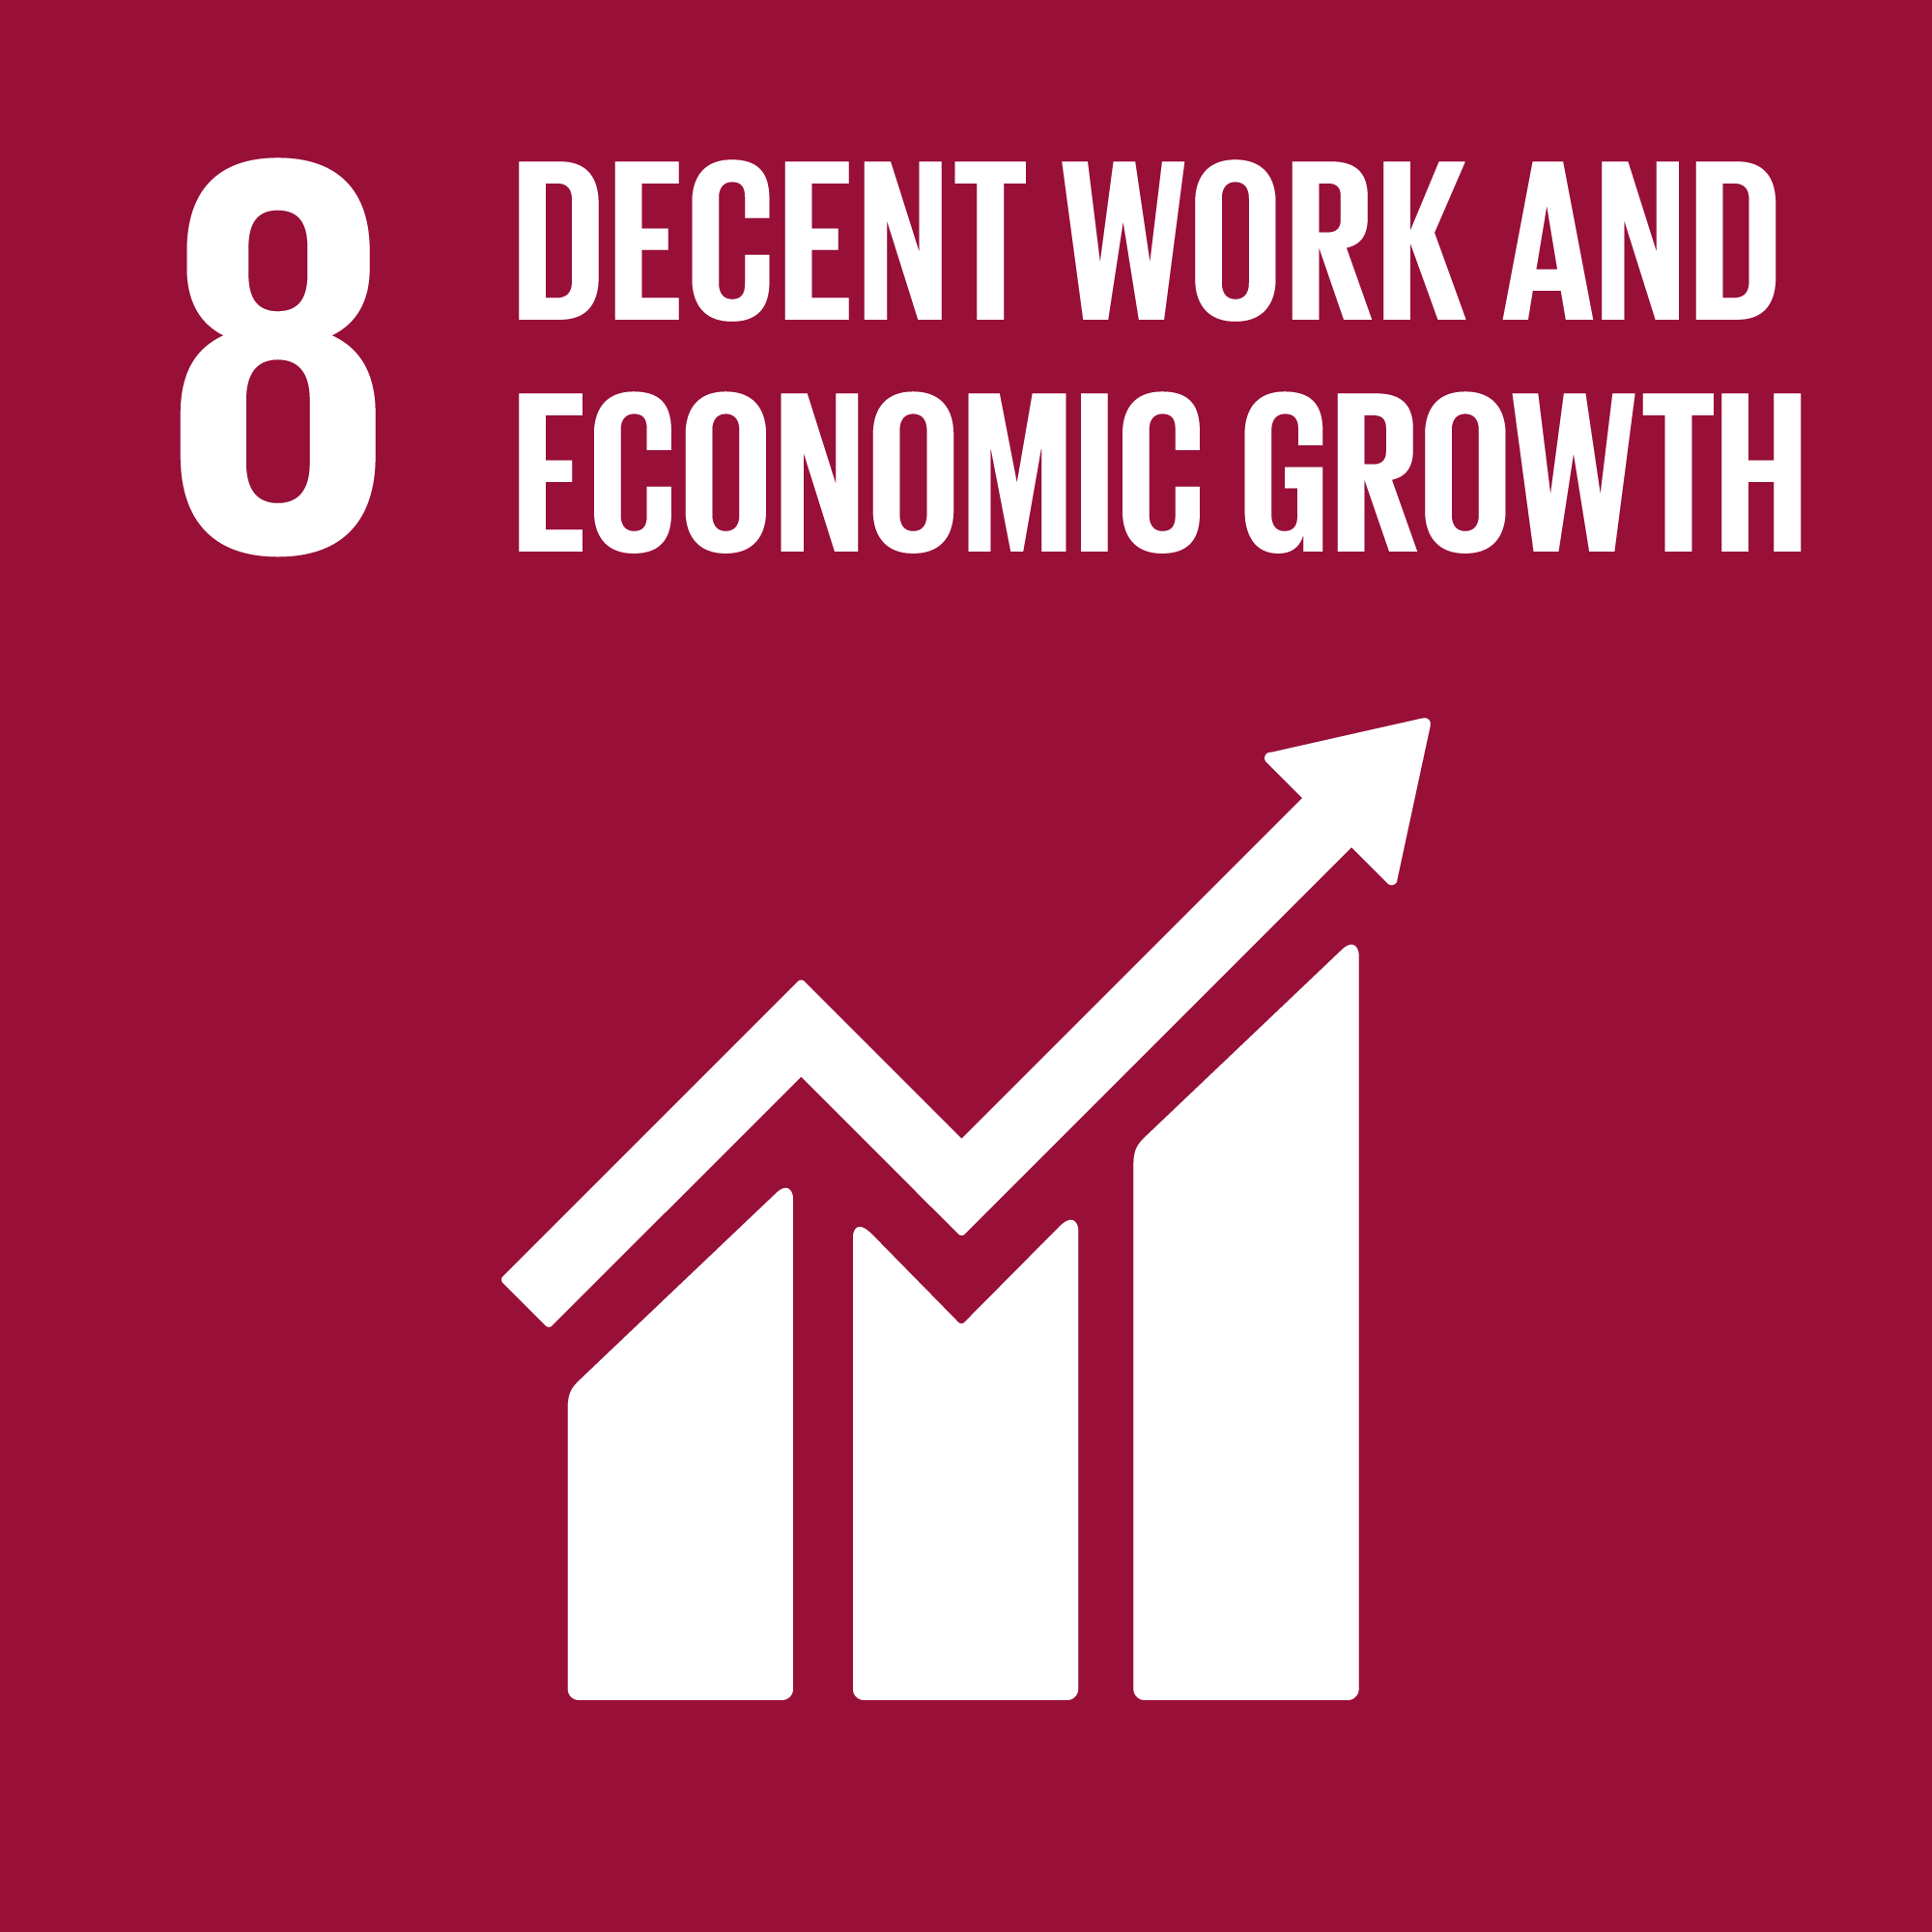 Go to https://www.globalgoals.org/8-decent-work-and-economic-growth